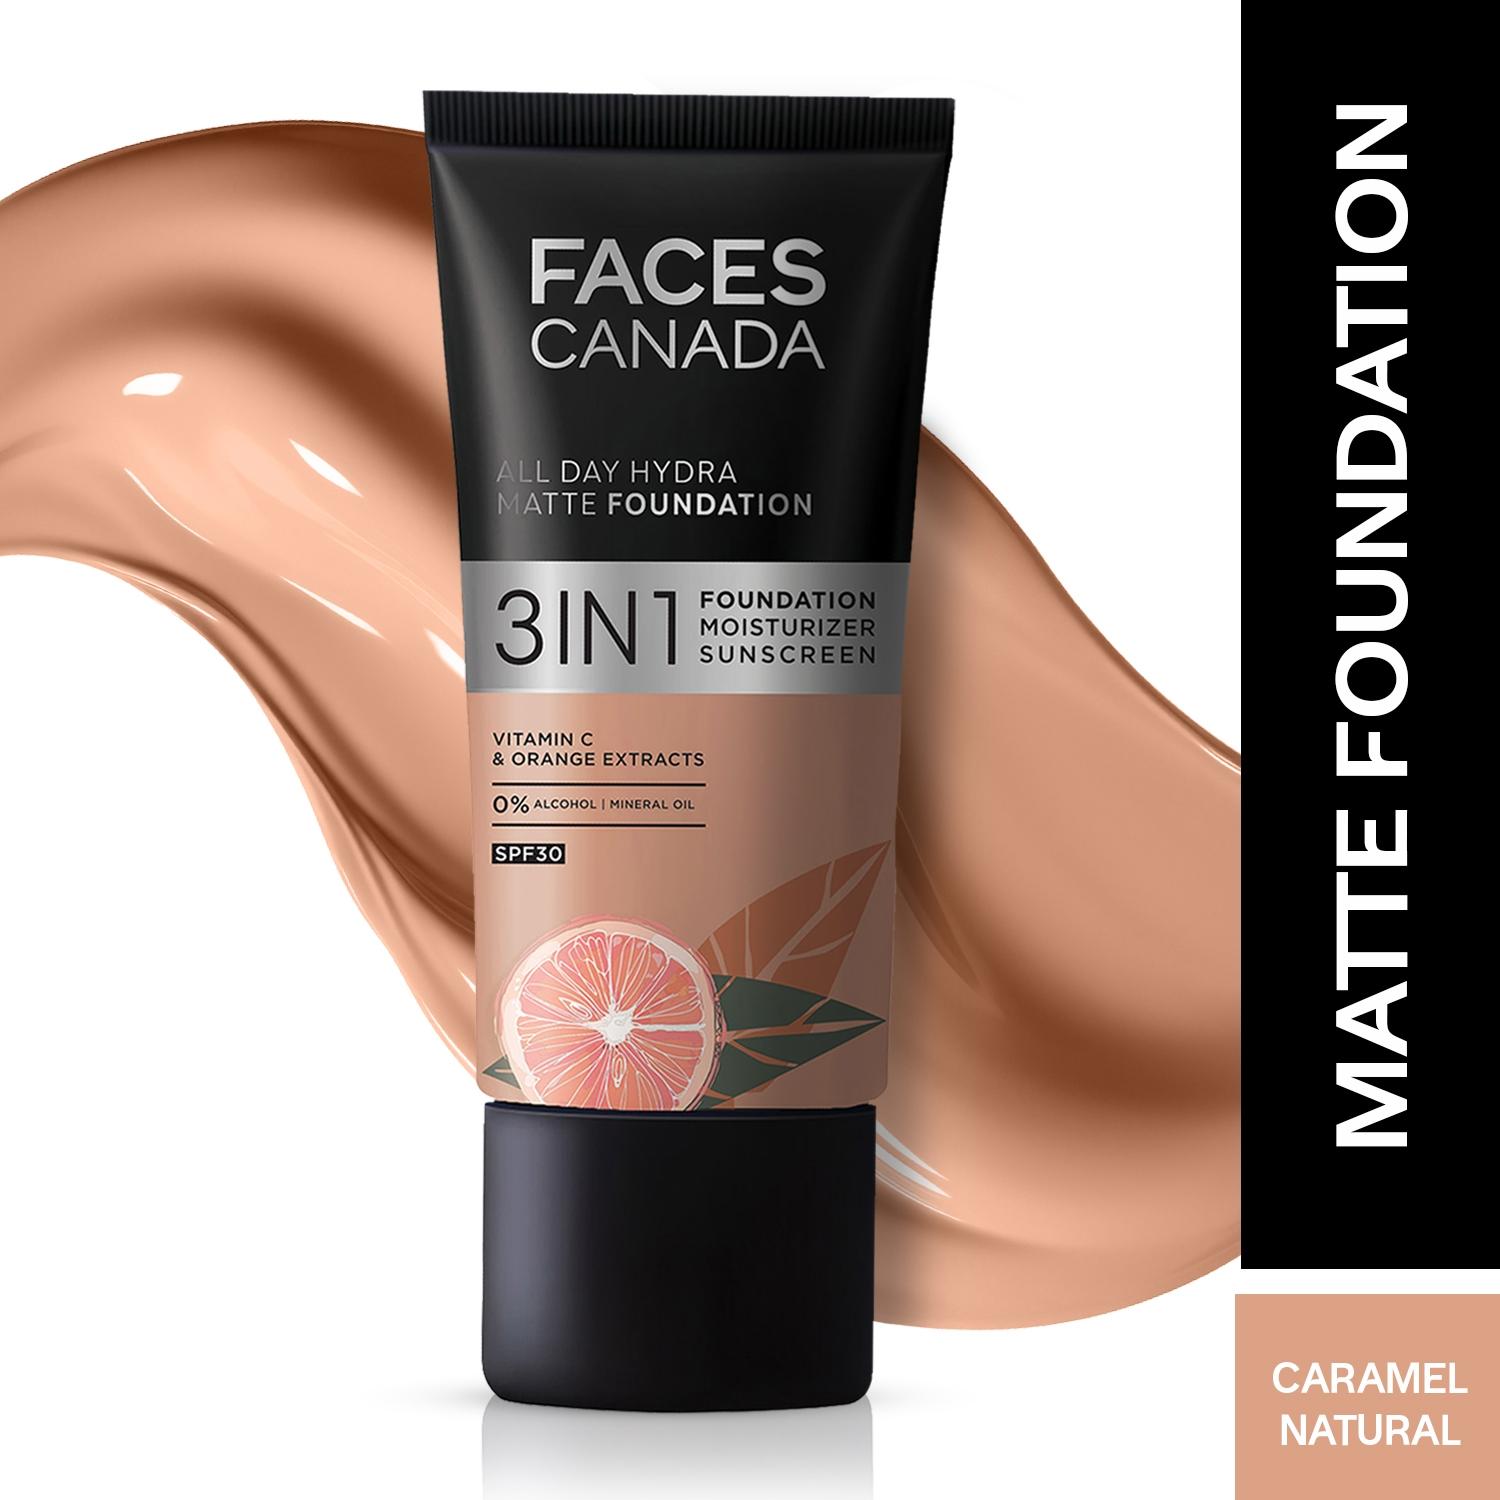 faces-canada-all-day-hydra-matte-foundation---23-caramel-natural-(25ml)